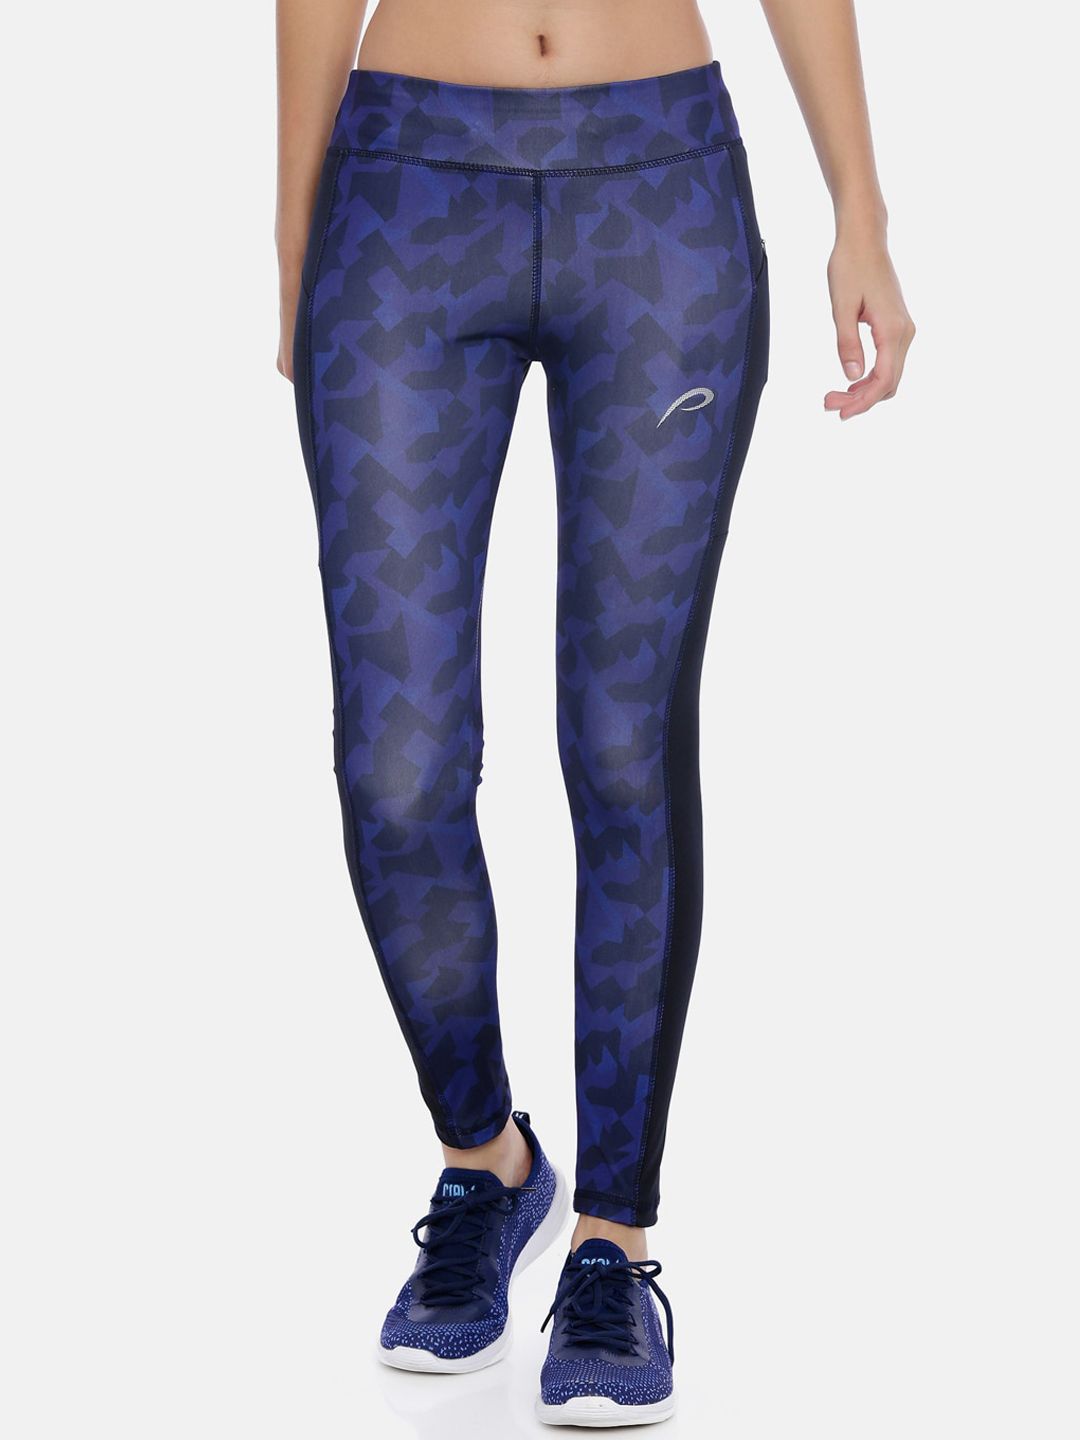 Proline Women Blue & Black Printed Tights Price in India